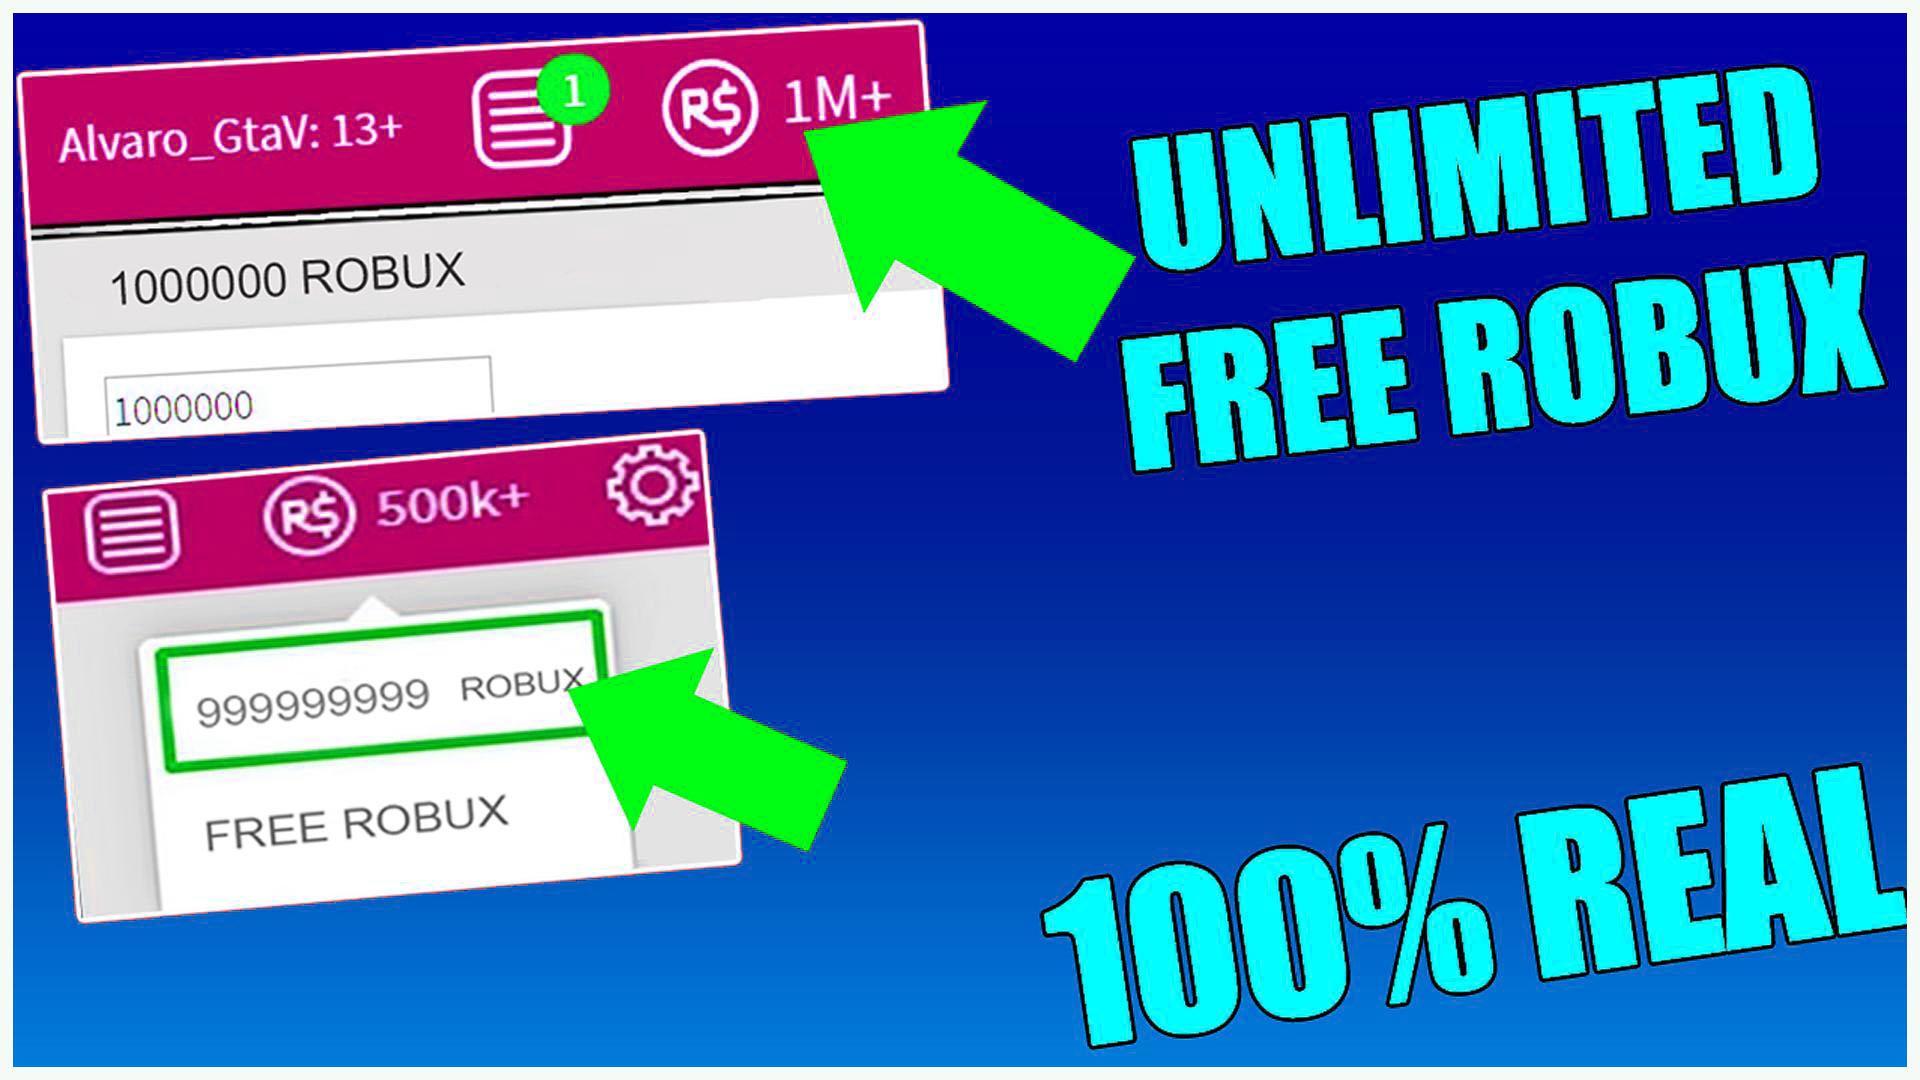 Free Robux New Tips 2020 For Android Apk Download - how to get free robux in roblox 100 percent works